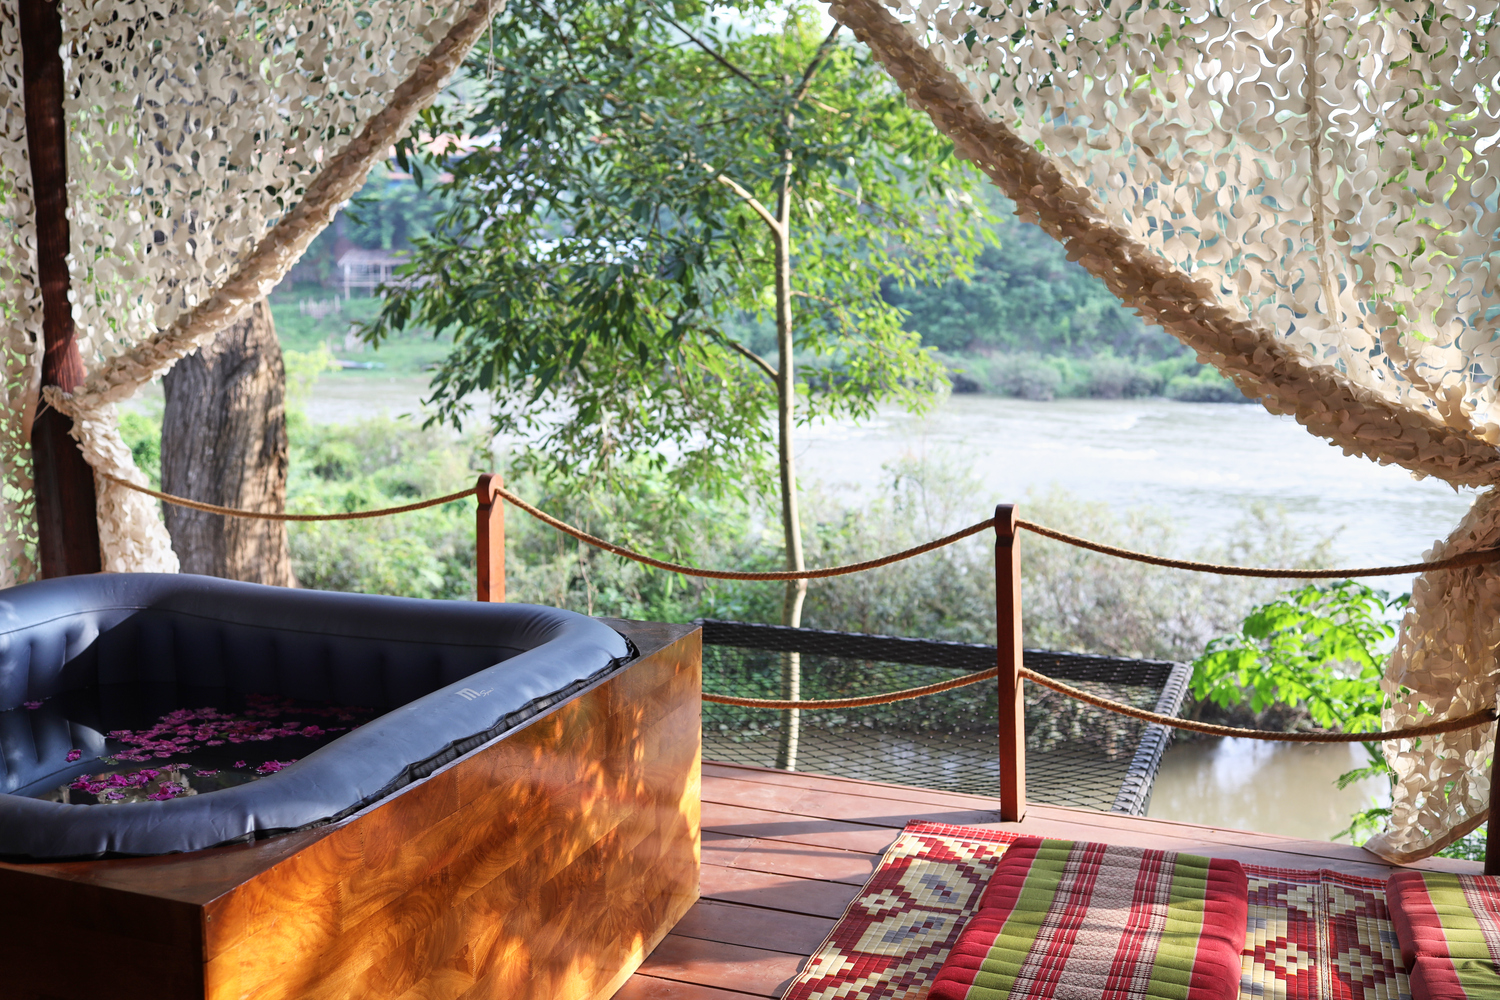 A hot tub on a deck overlooking the Luang Prabang river.